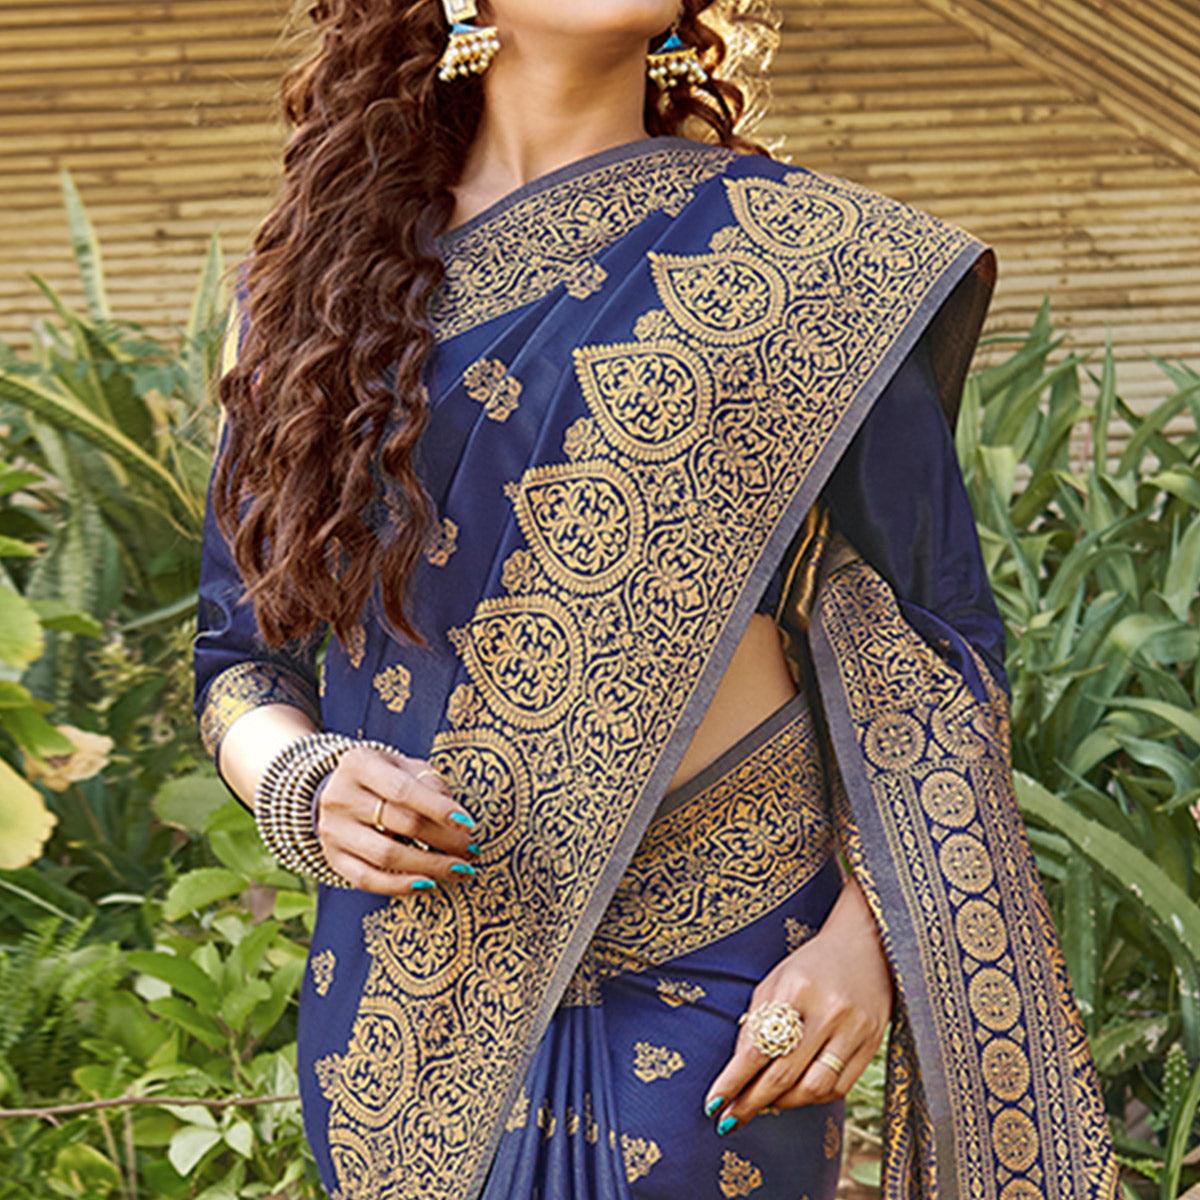 Staring Navy Blue Colored Festive Wear Geomatric Woven Silk Blend Saree With Tassels - Peachmode